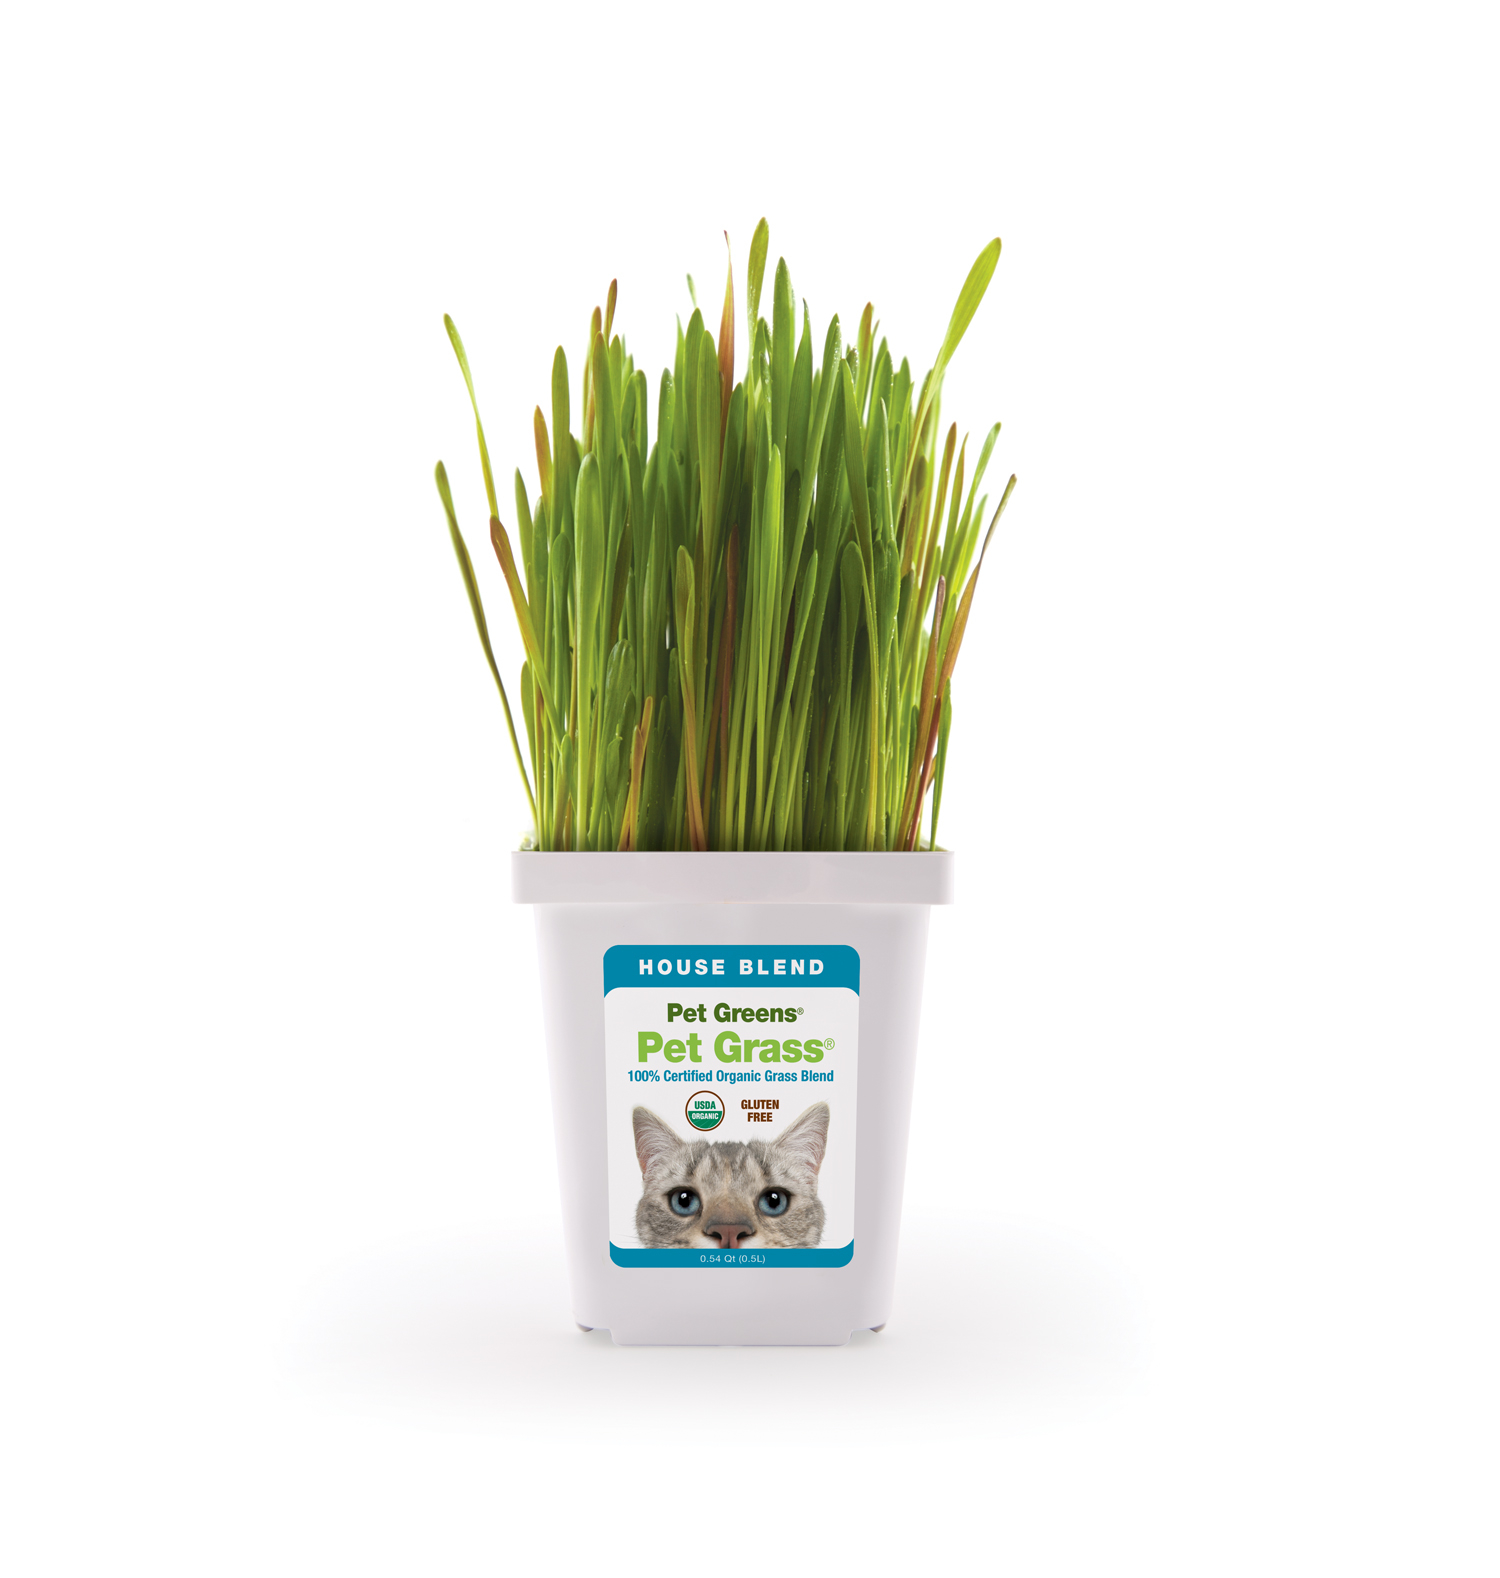 Bell Rock Growers Introduces New Varieties of Pet Greens Cat Treats and